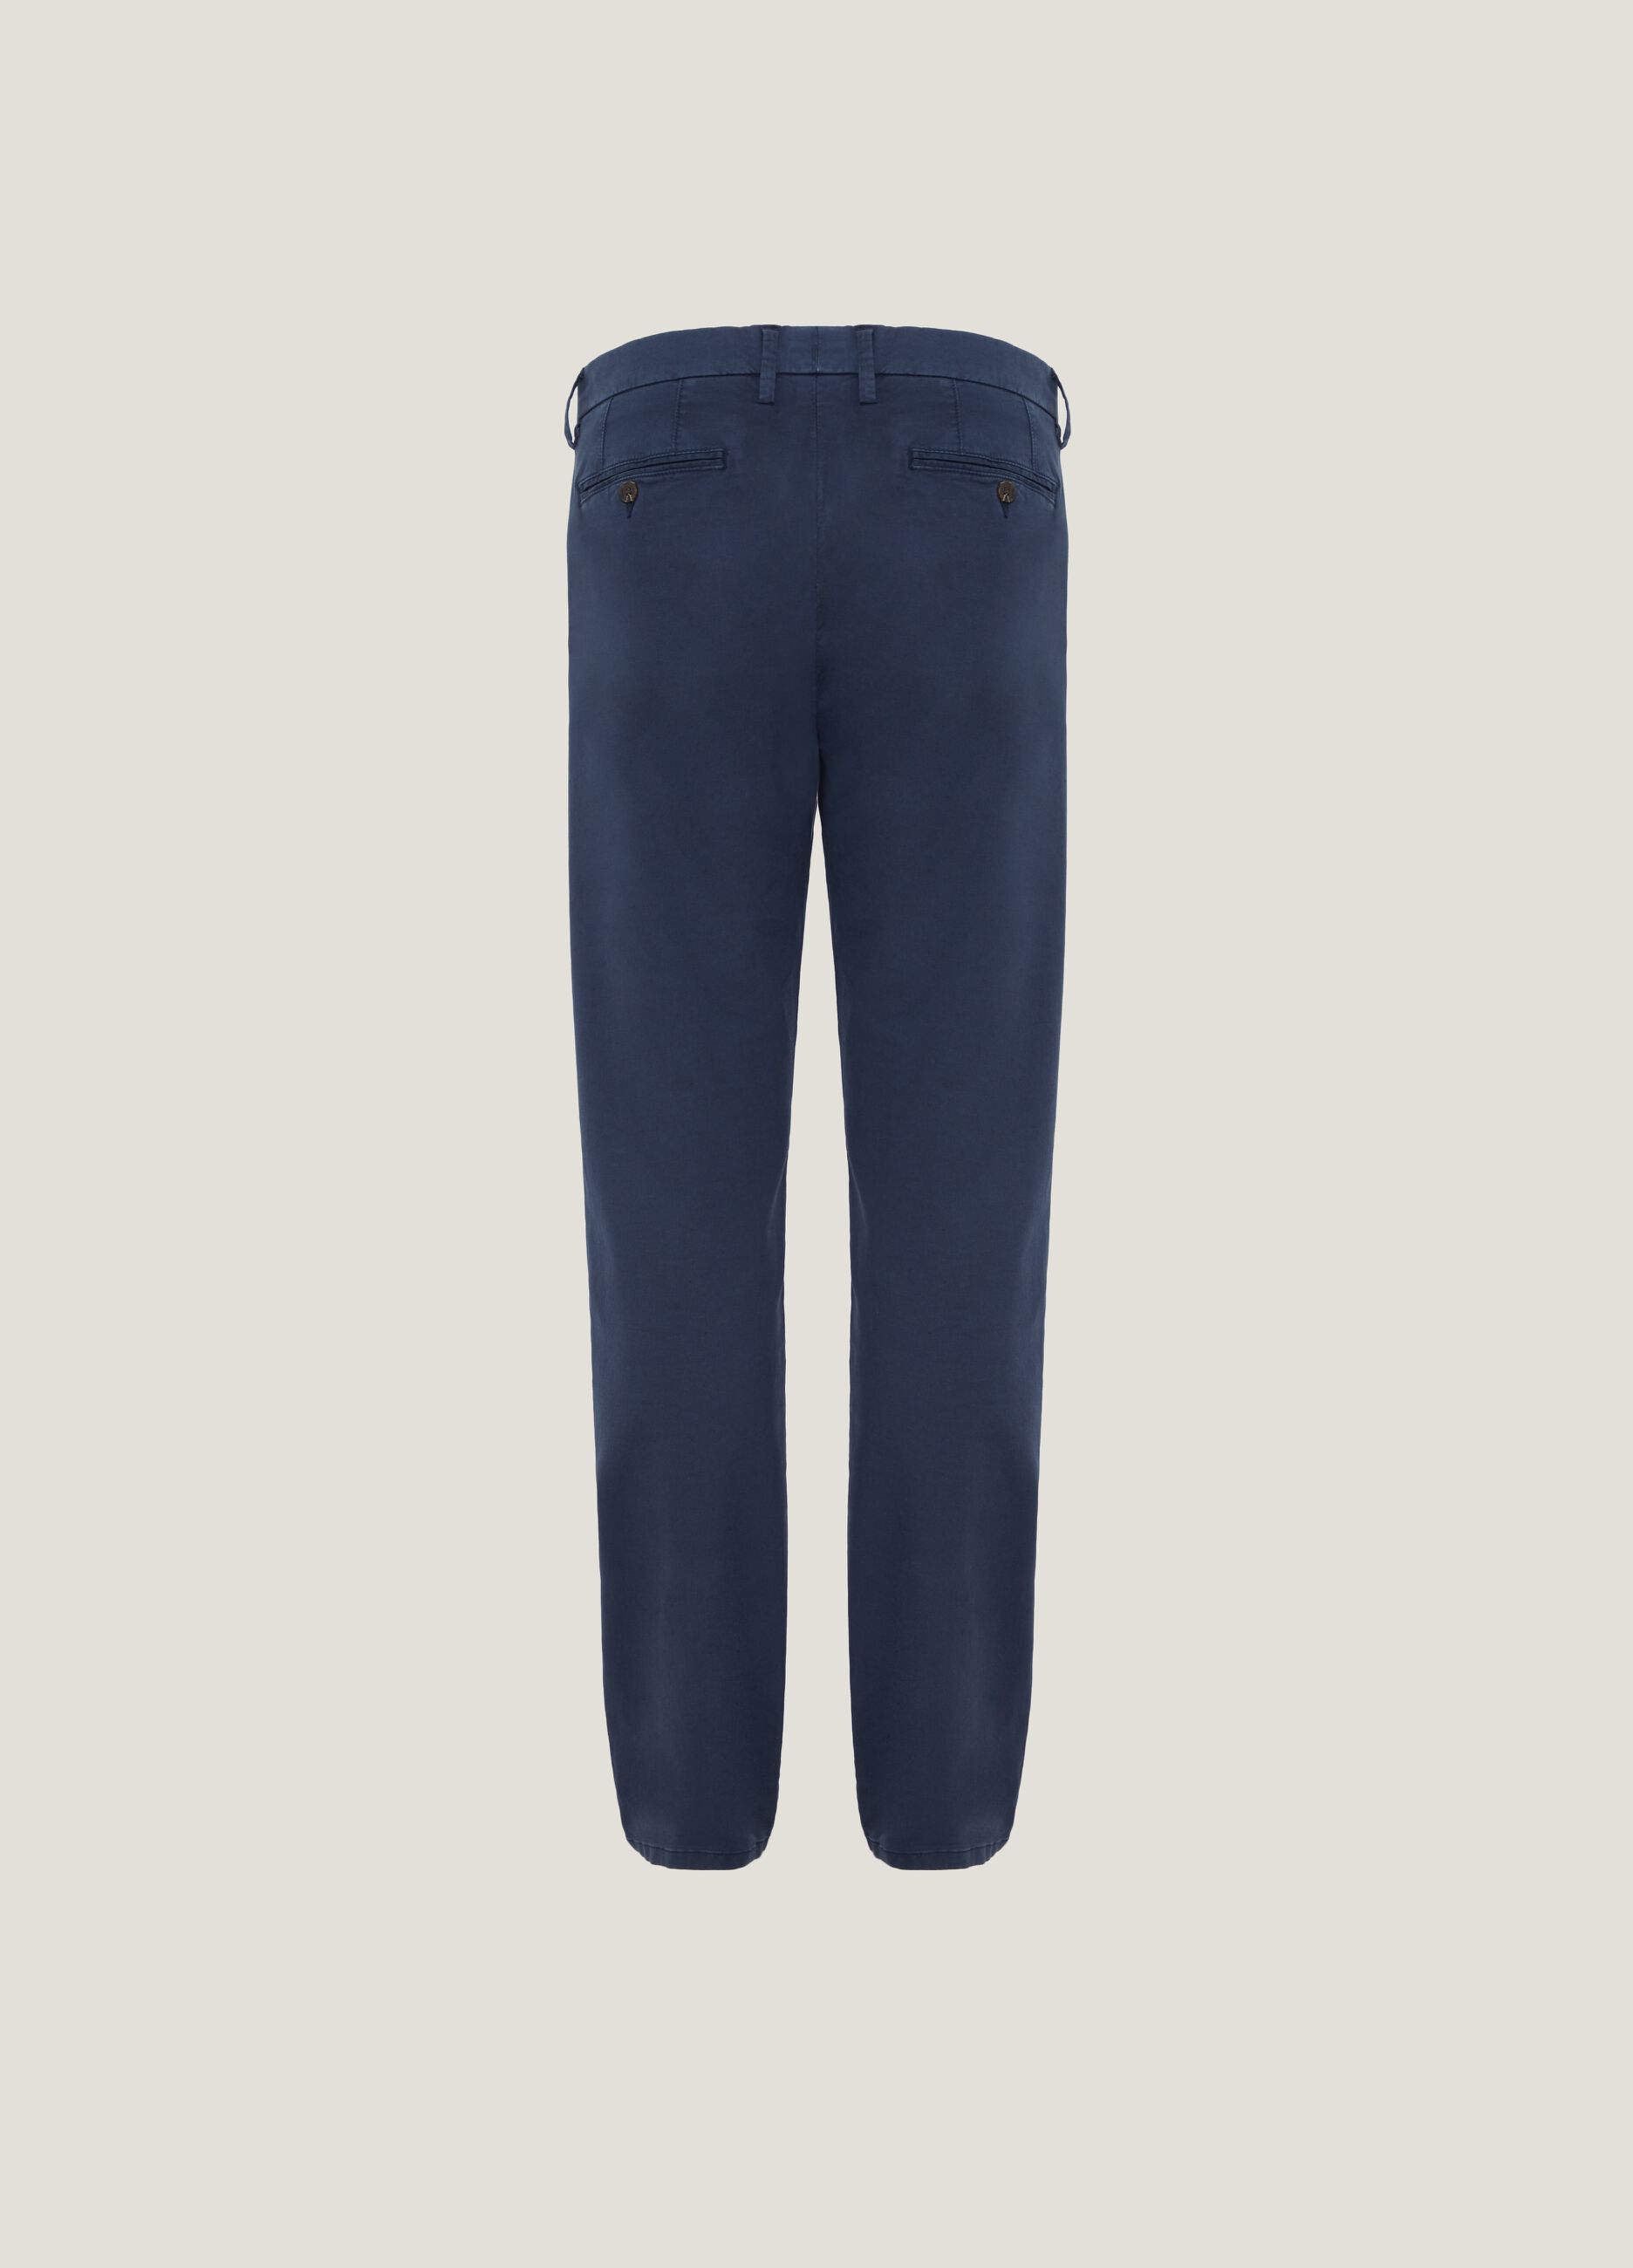 Linen and cotton trousers